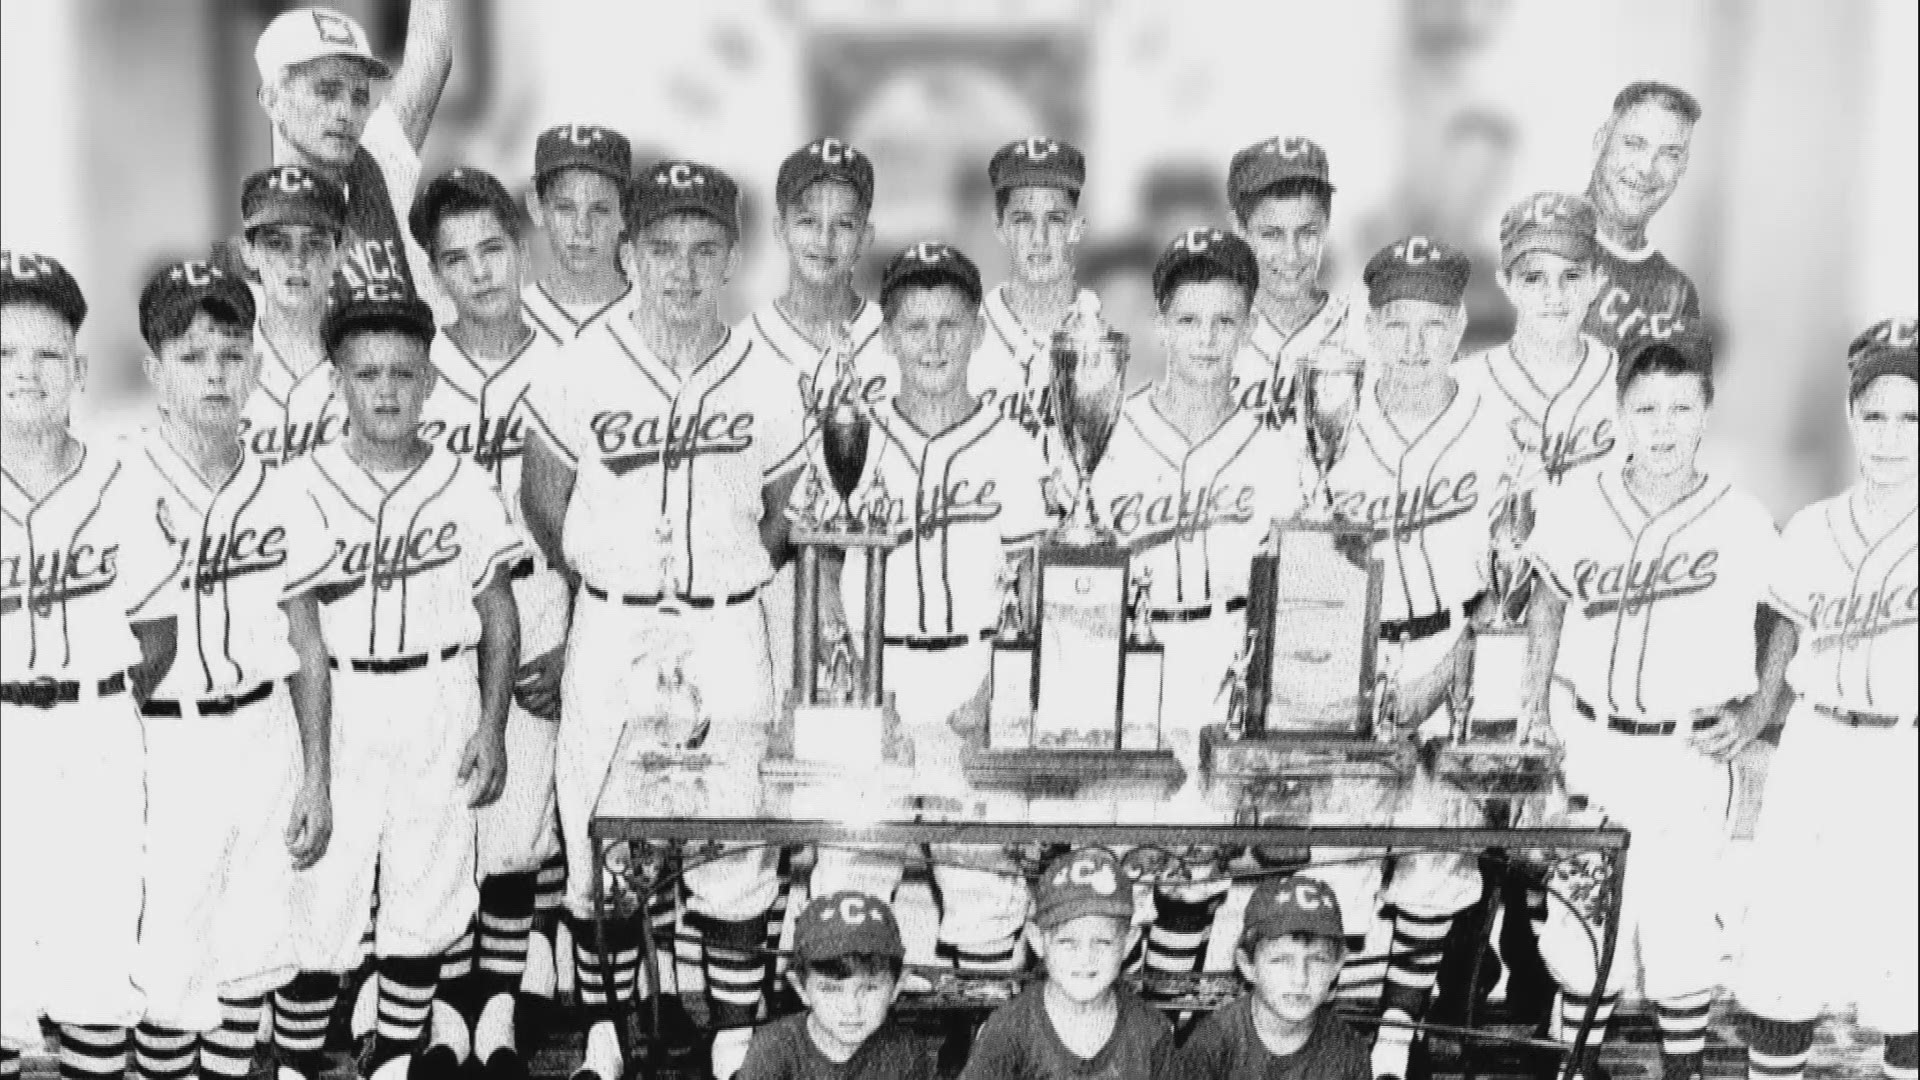 While members of the 1964 Cayce Dixie Youth Baseball team are excited for the new exhibit, they can't help but think about the players and coaches who have already passed.